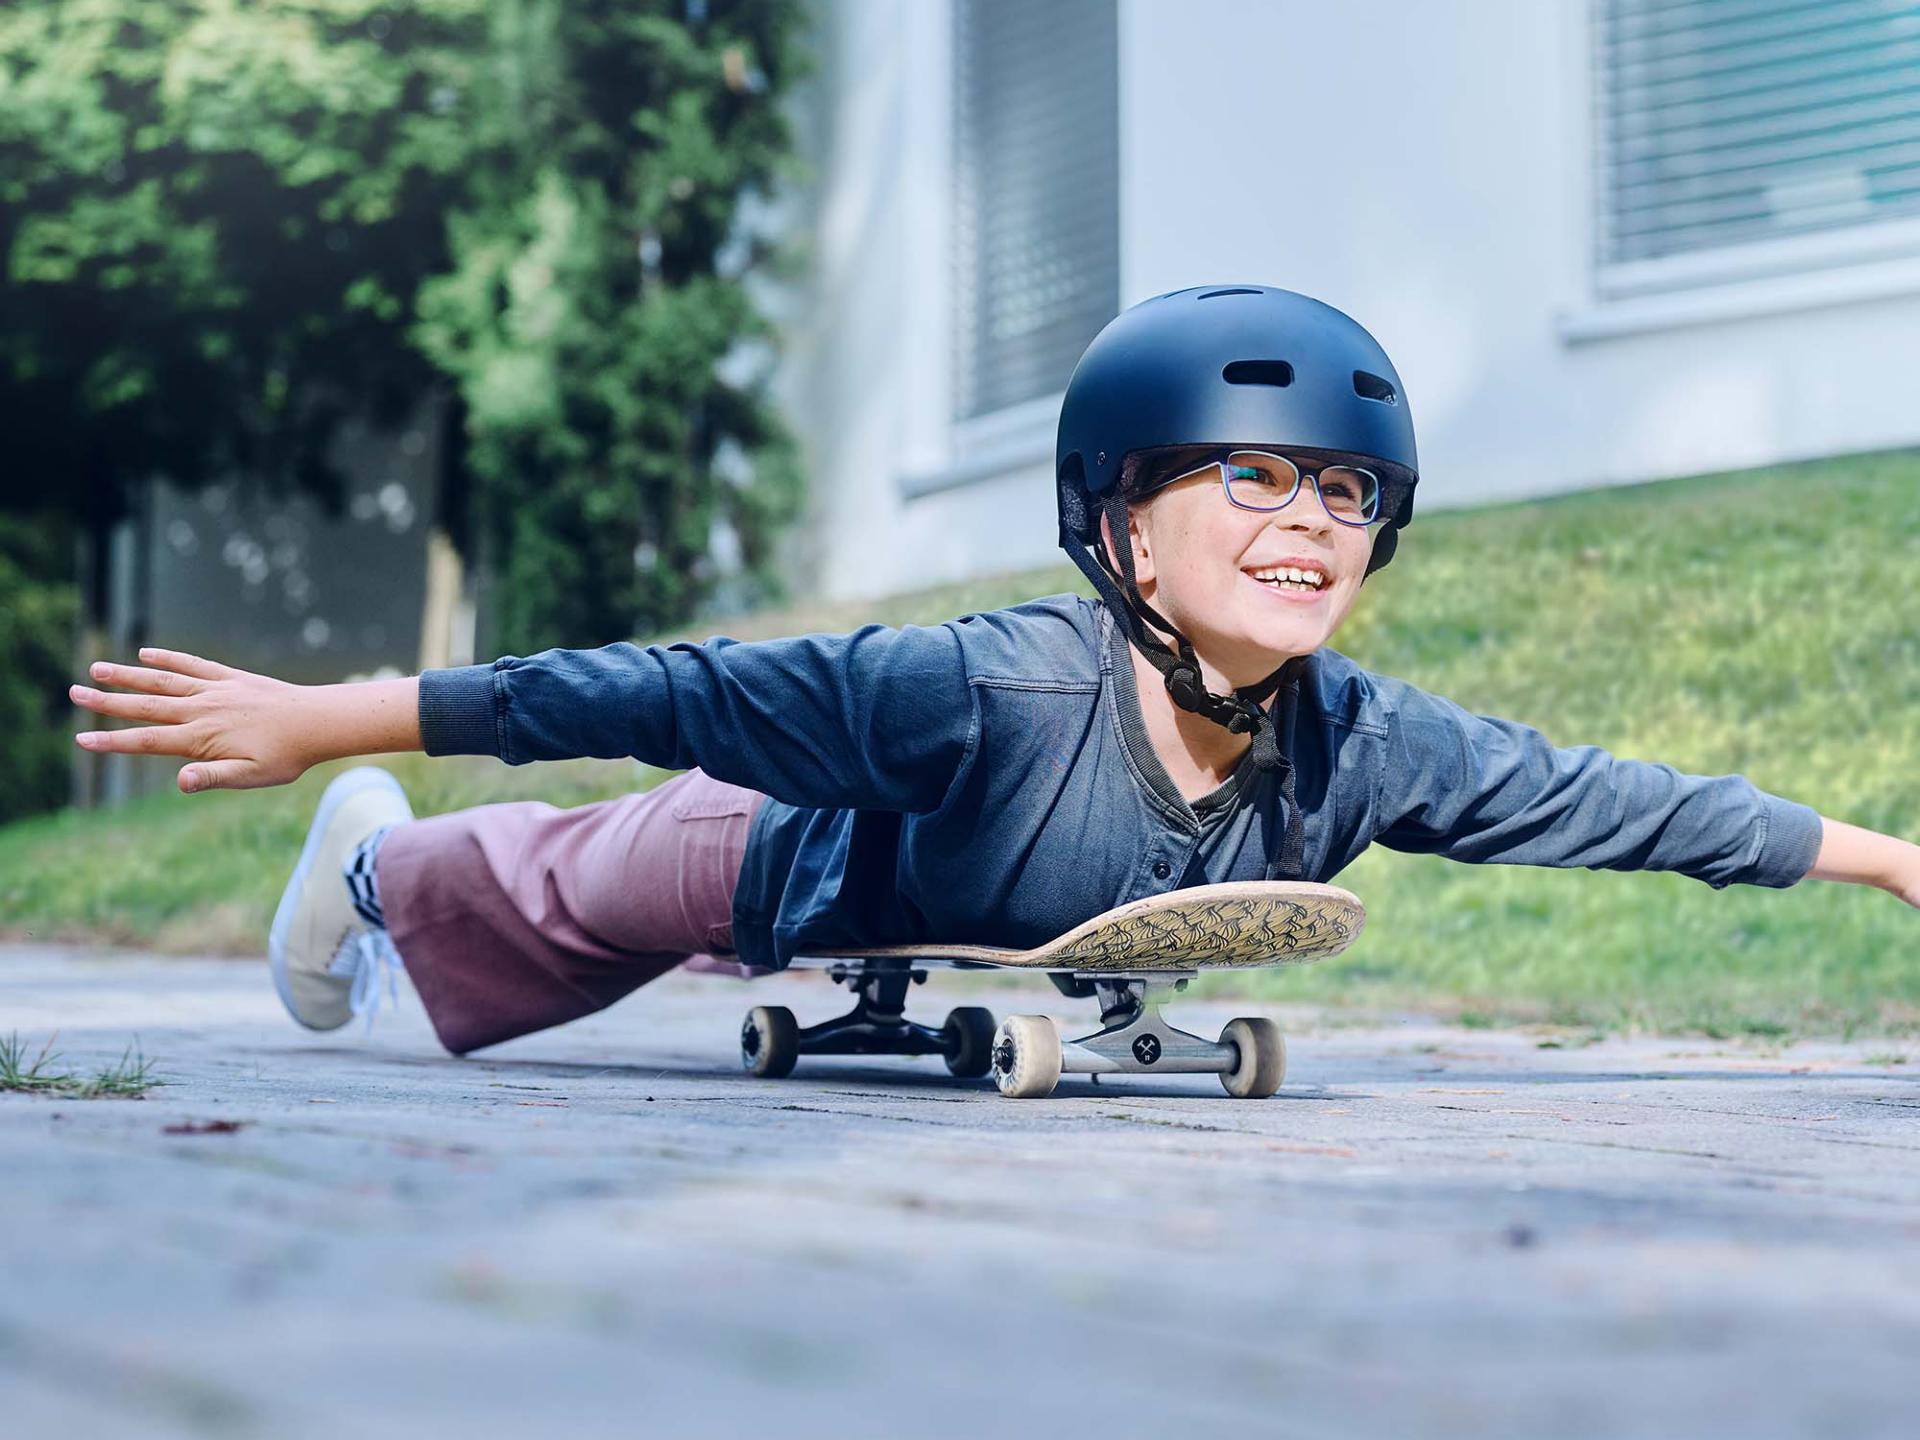 A girl with a helmet and glasses rolls down the road lying on a skateboard with her arms stretched out.